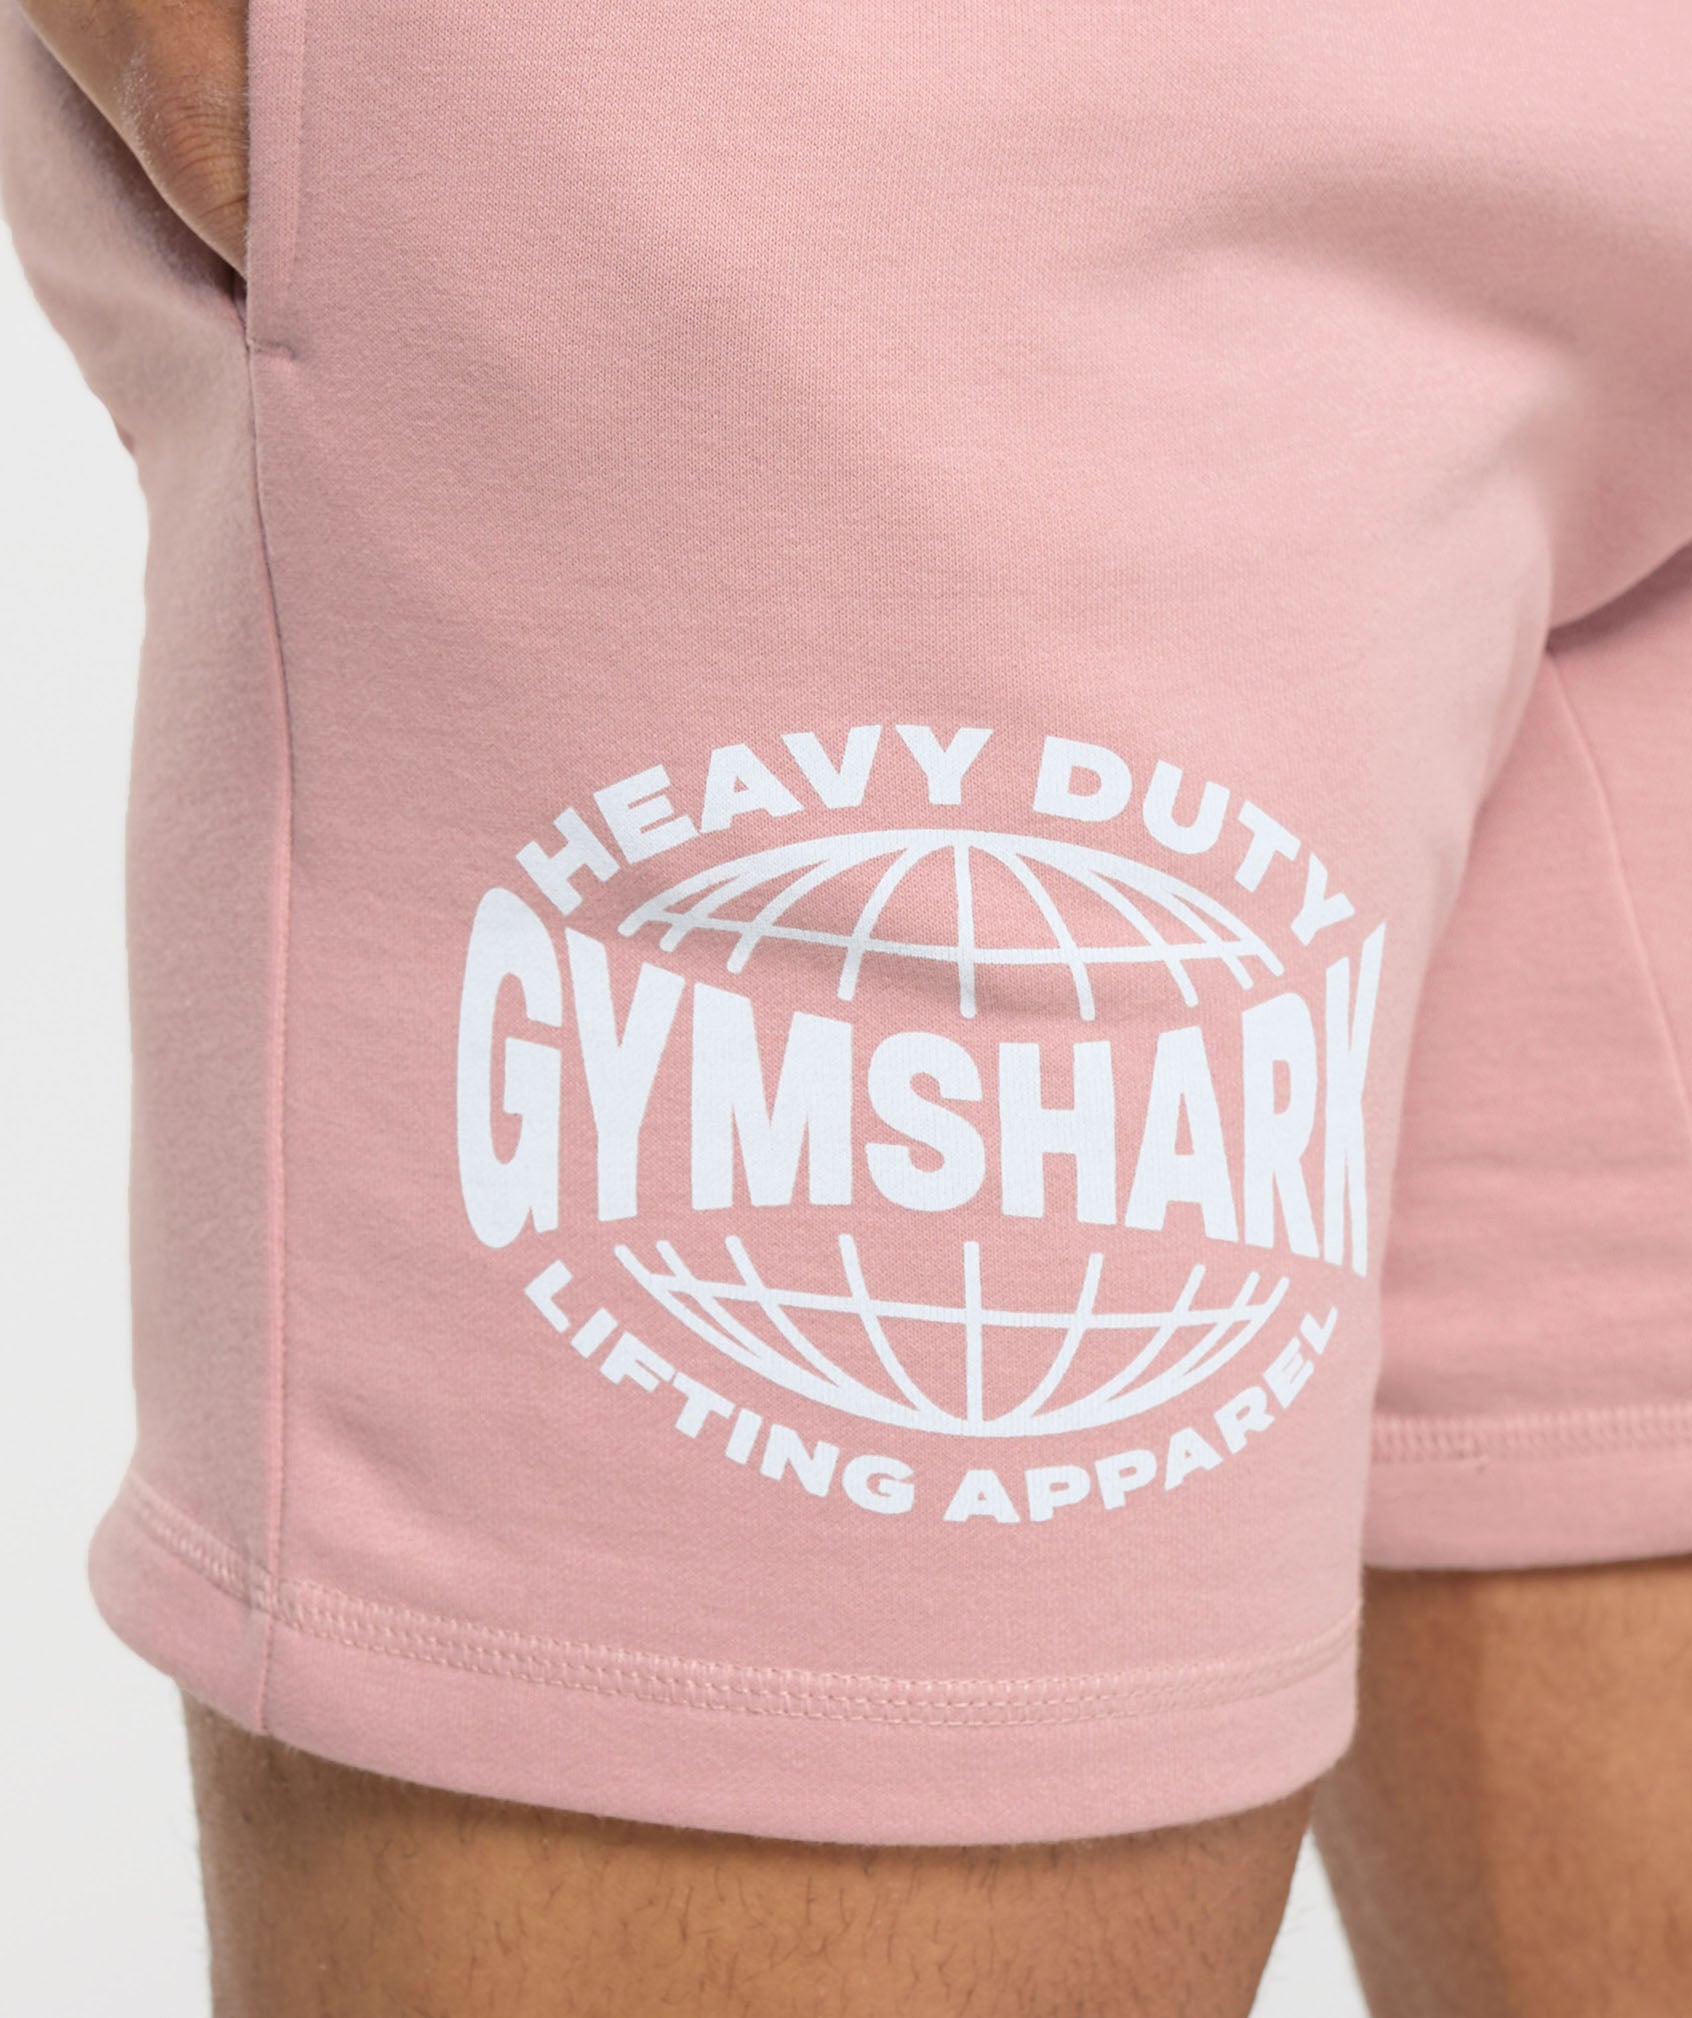 Heavy Duty Apparel 7" Shorts in Light Pink - view 6